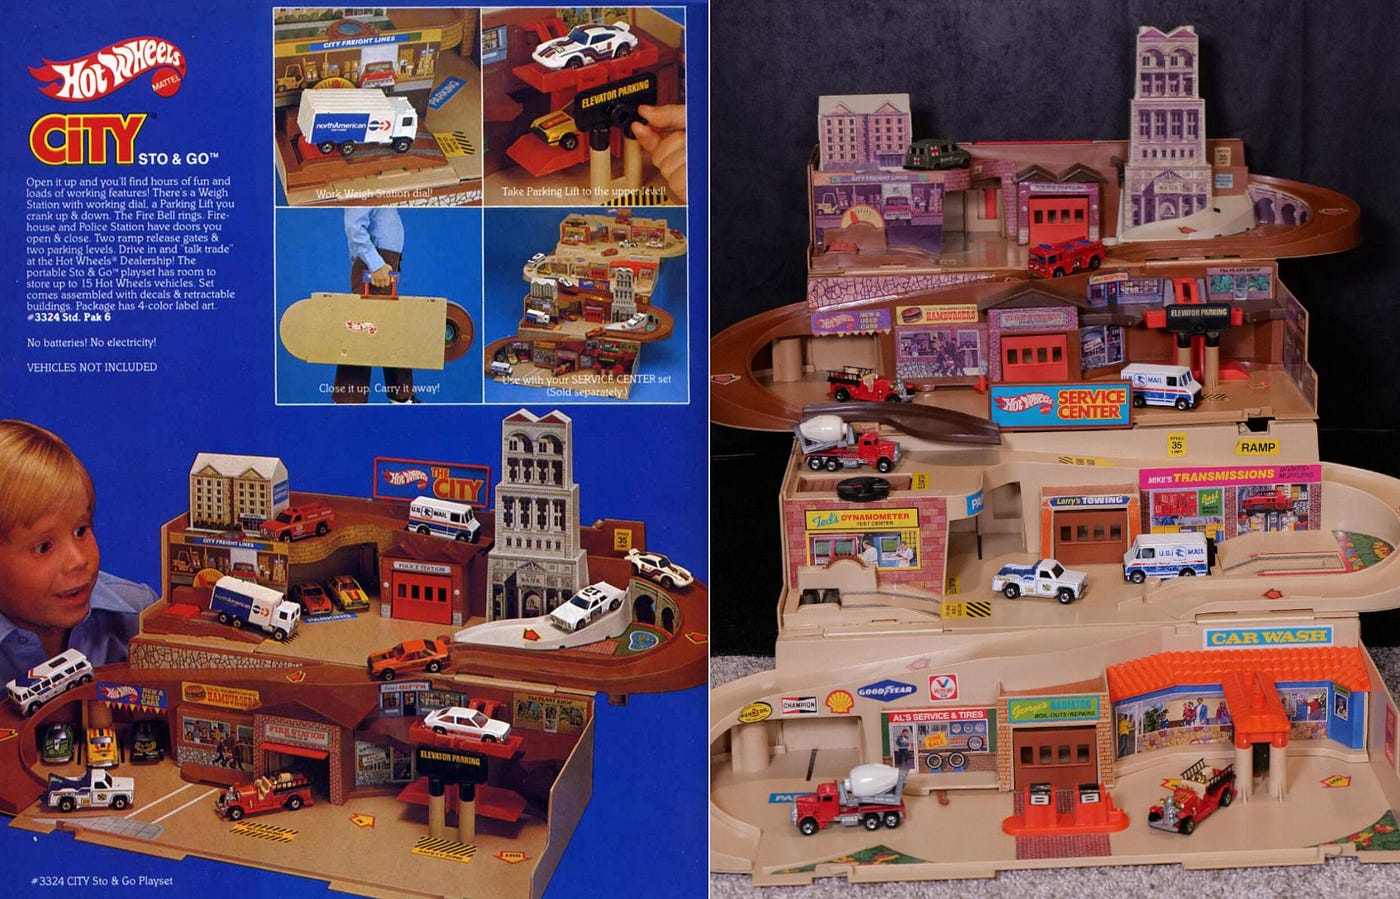 The Toys That Made Us: The First Hot Wheels Sto & Go Playset | by Doug  Arcuri | Medium